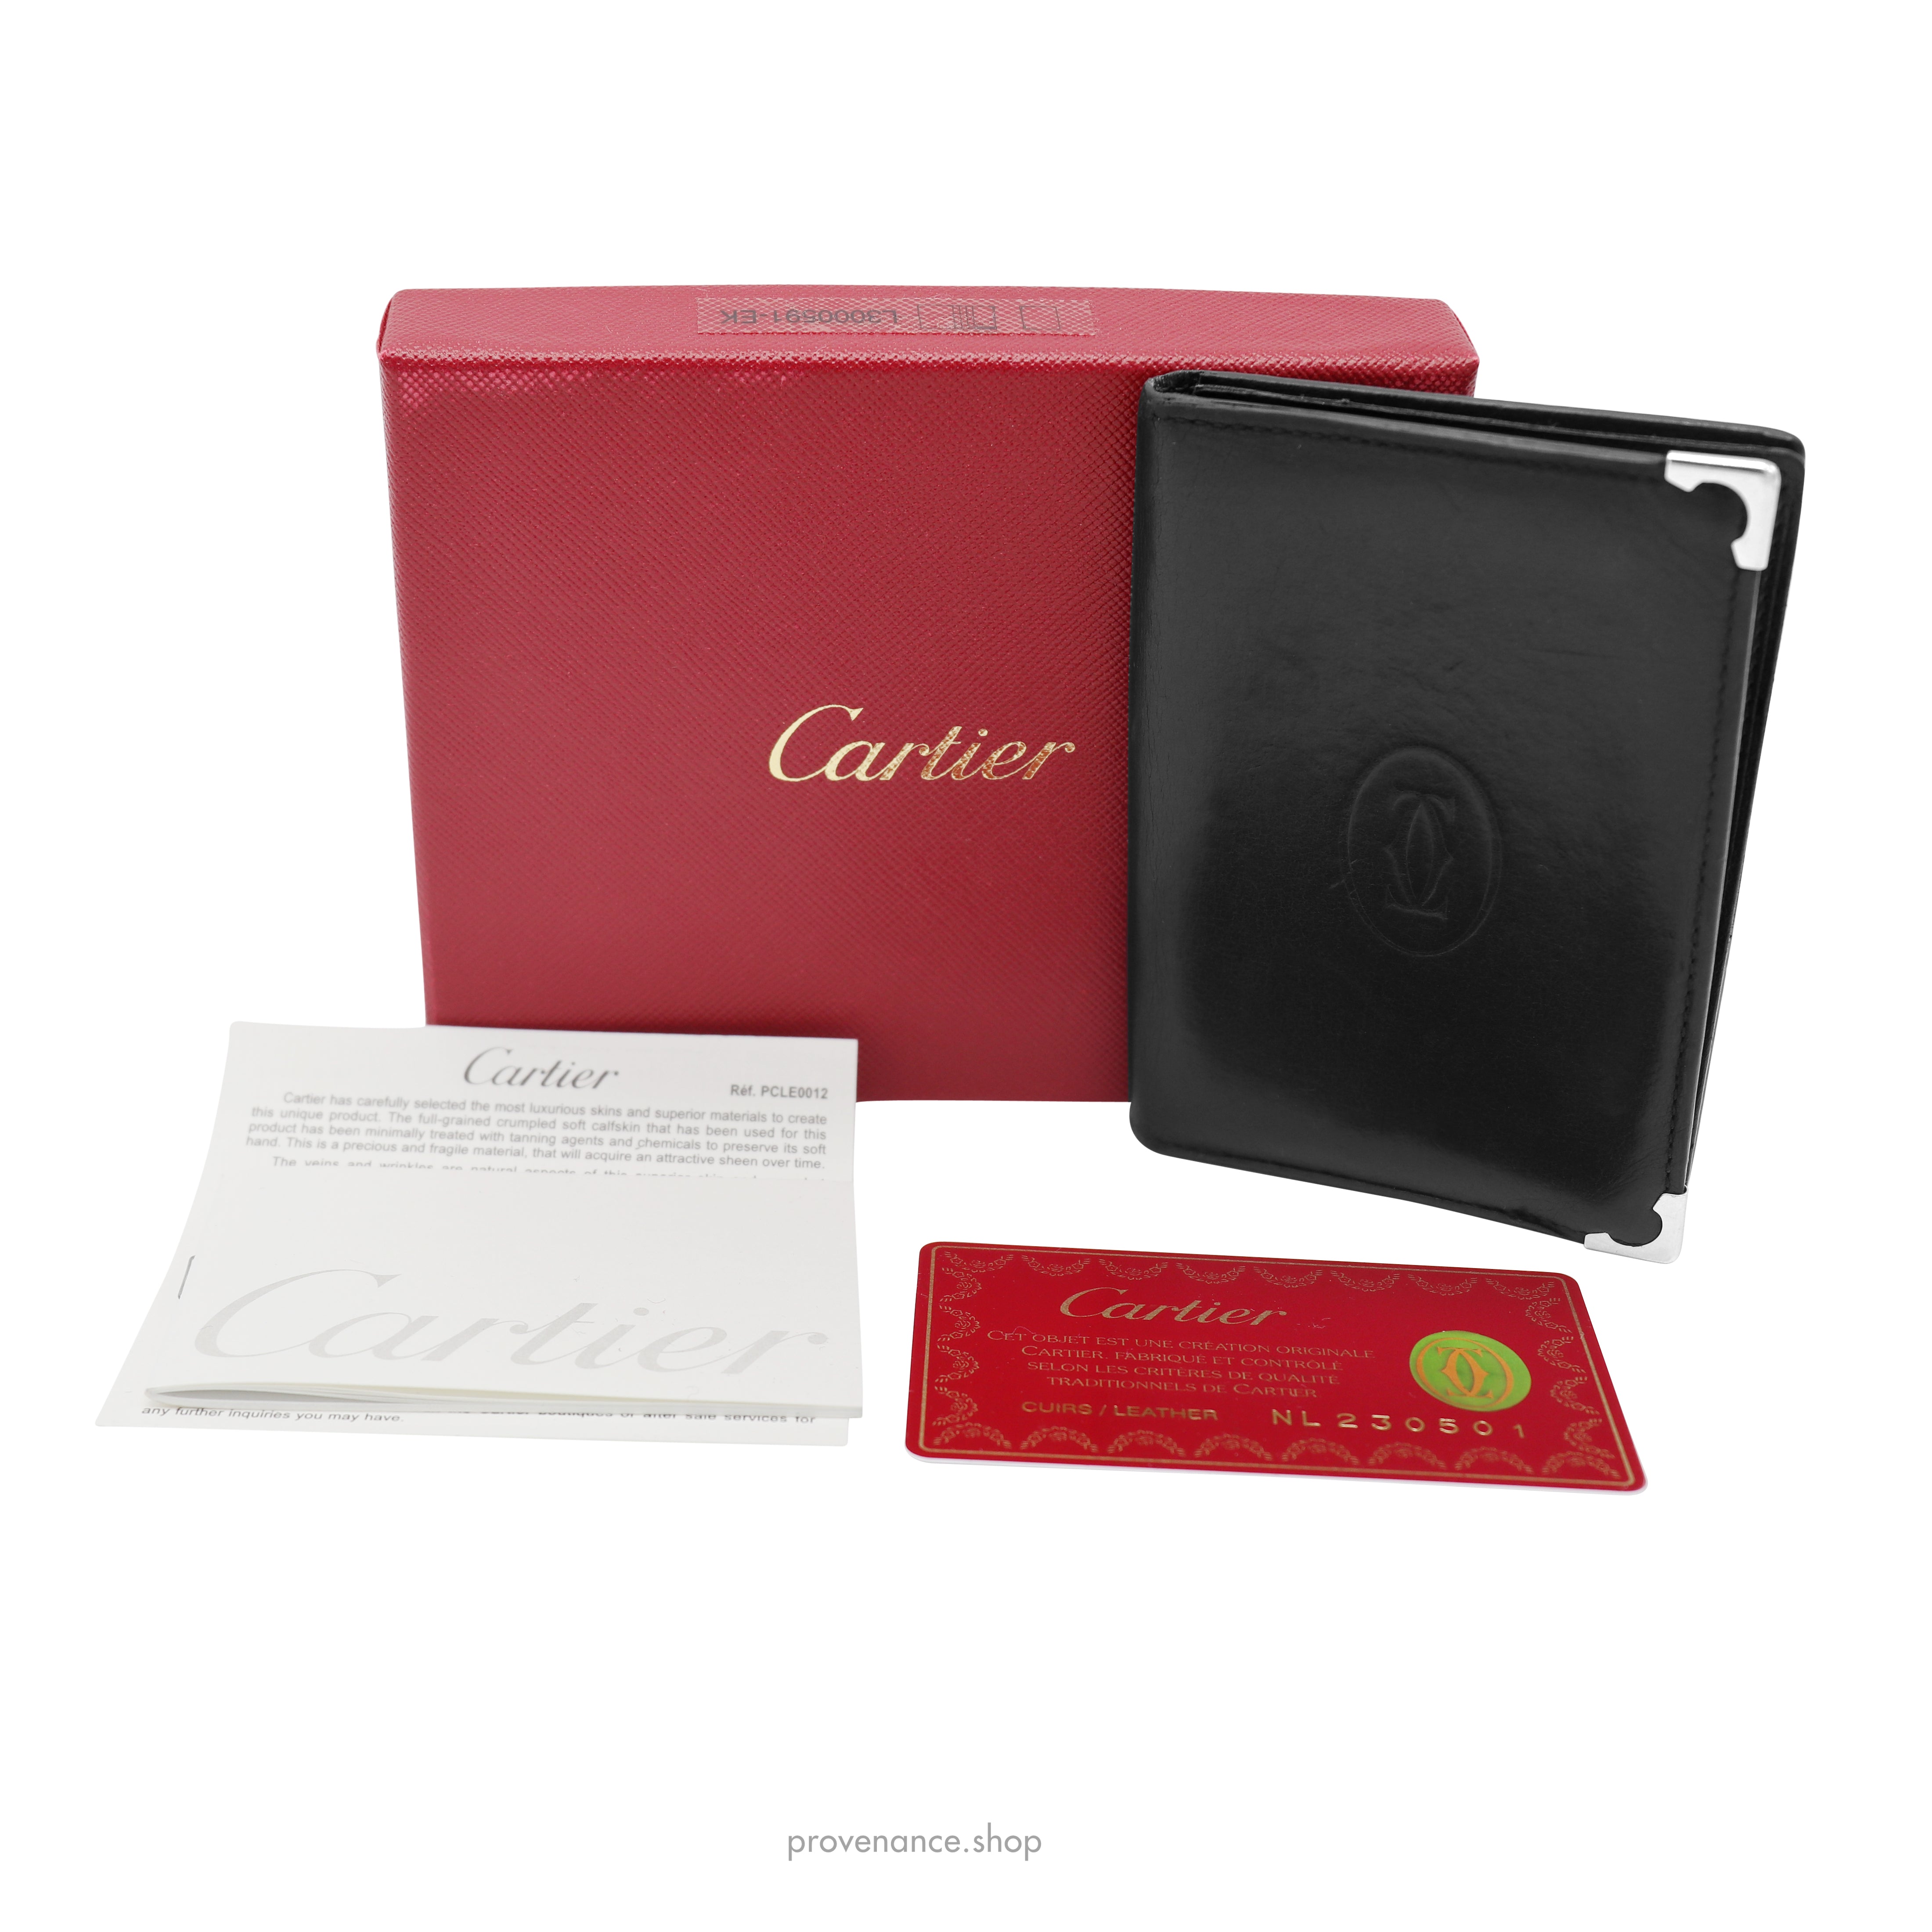 Panthère de Cartier Small Leather Goods, Card holder - Wallets and pouches